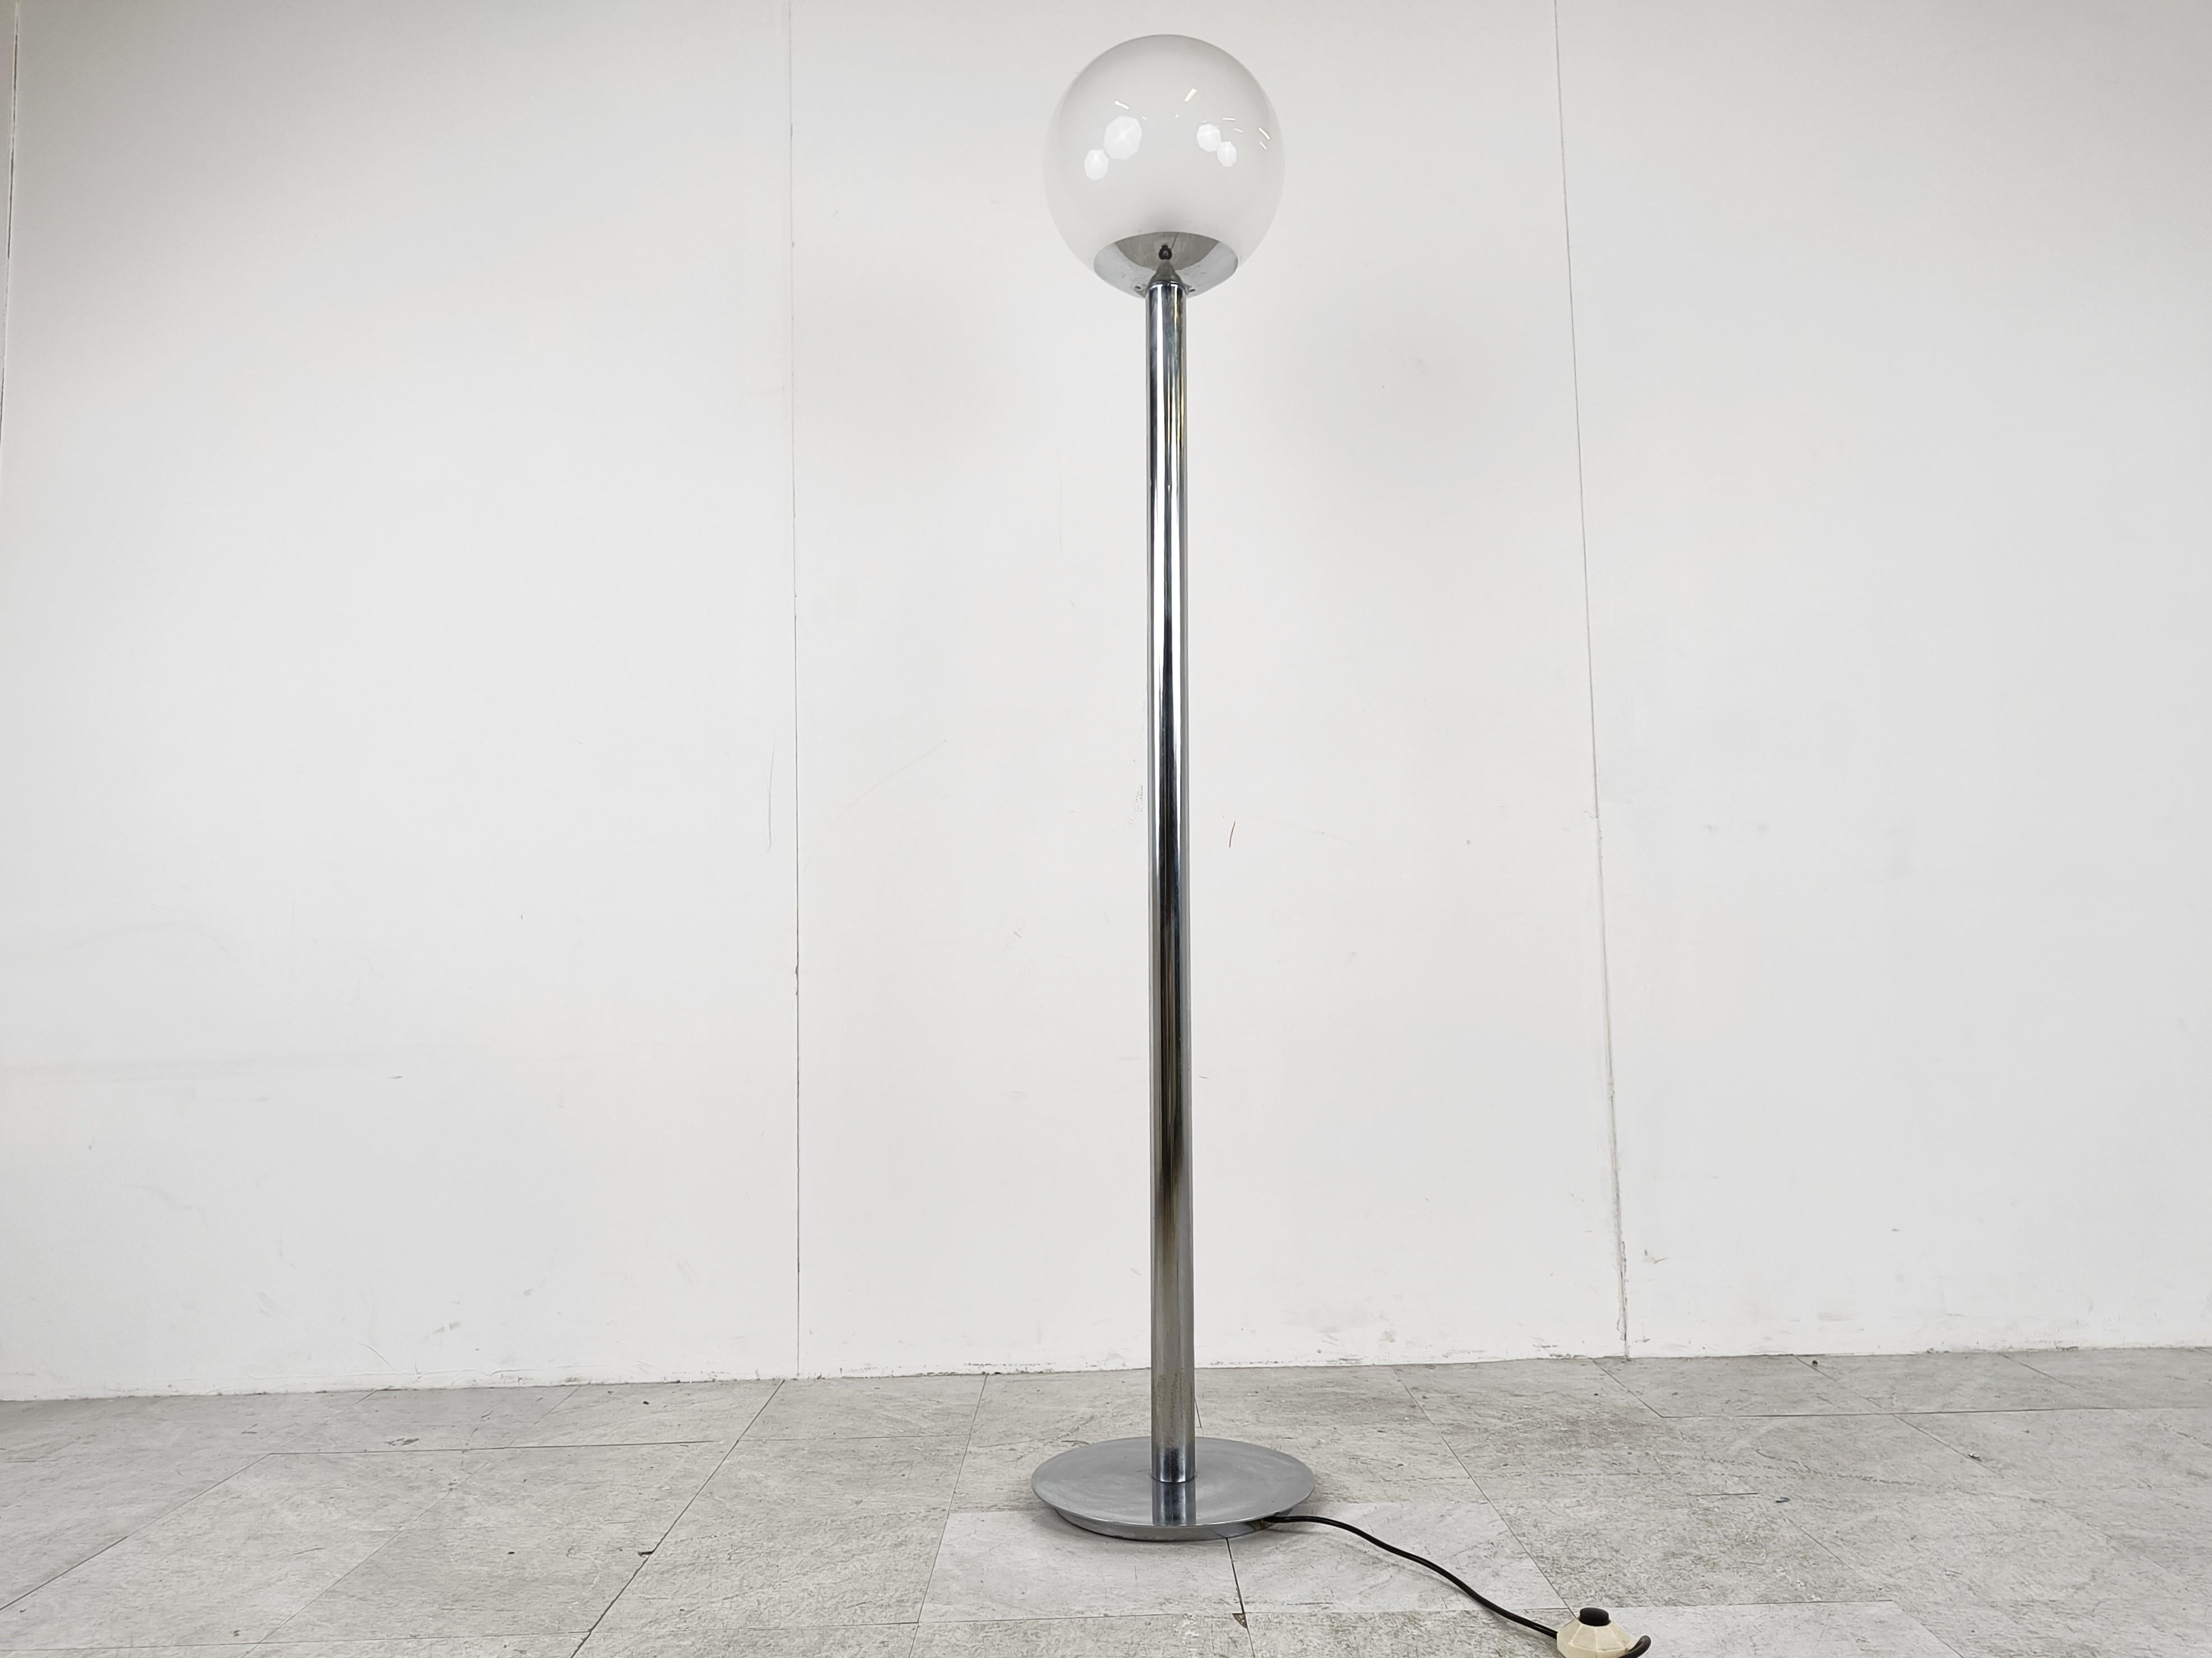 Vintage Chrome and Glass Floor Lamp, 1970s For Sale 1